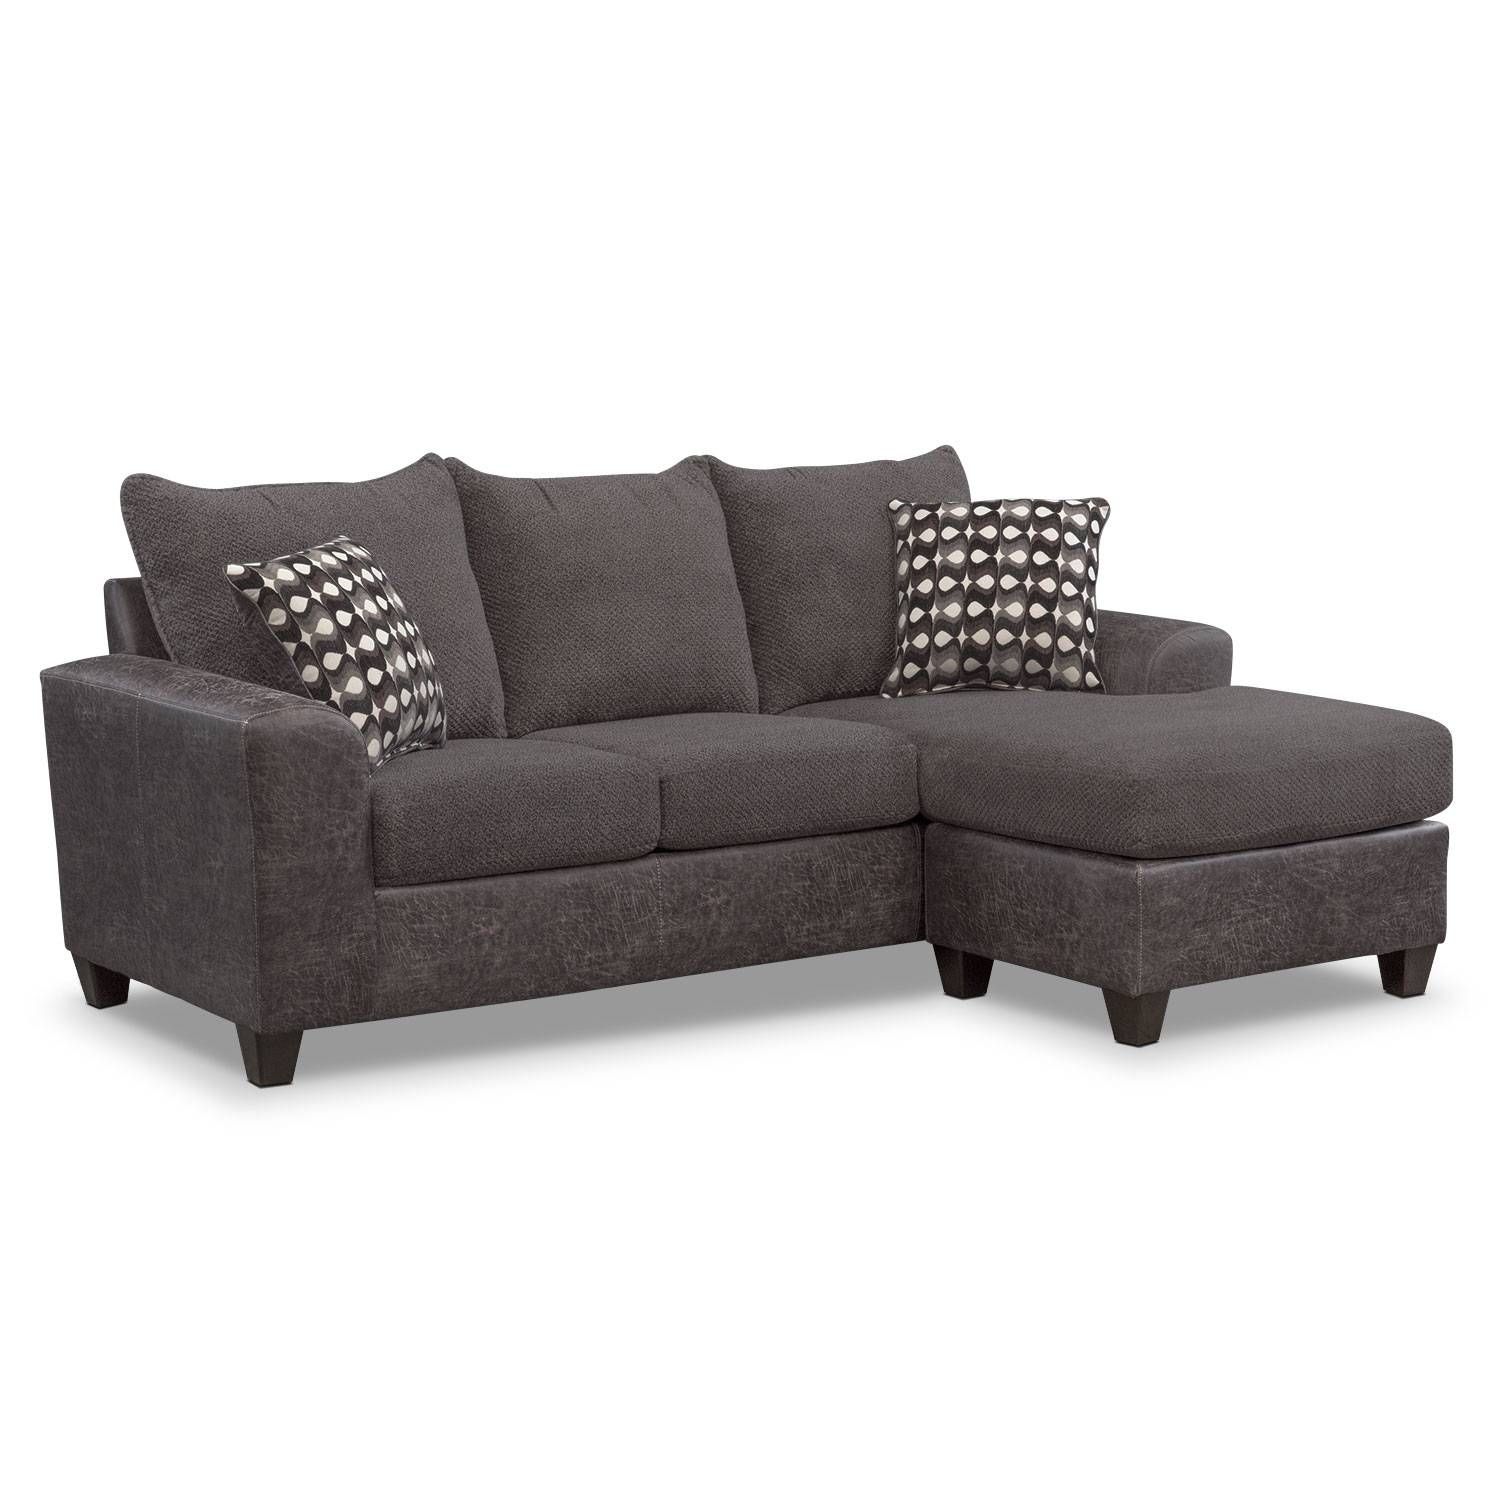 Sofas & Couches | Living Room Seating | Value City Furniture Inside Overstuffed Sofas And Chairs (Photo 8 of 15)